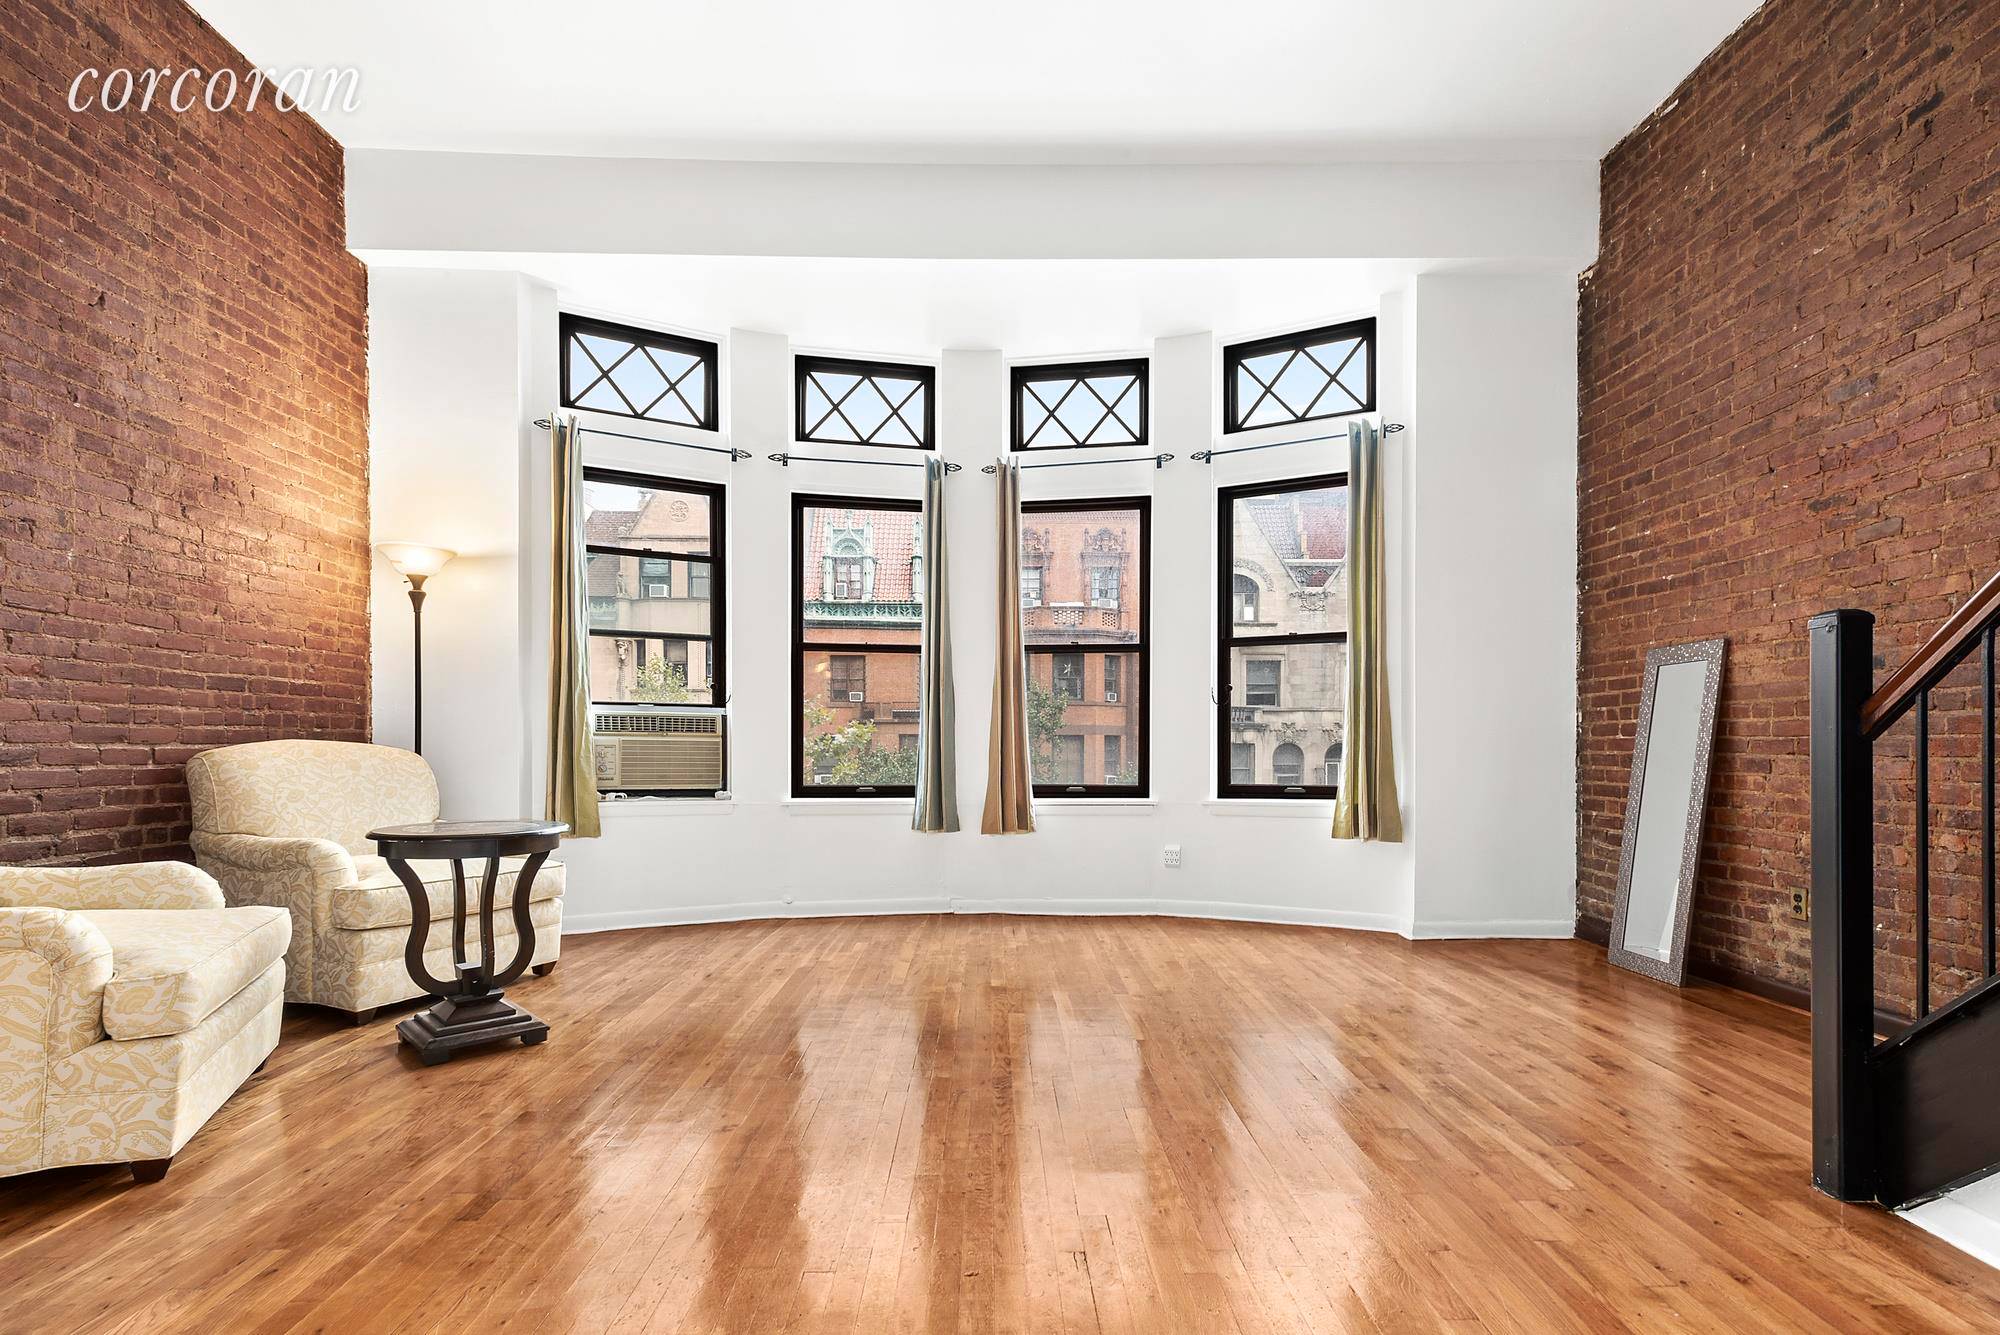 Back on Market ! A fantastic opportunity awaits the first home buyer to purchase this bright loft style apartment that is tempting with its look, charm and dynamic Upper West ...